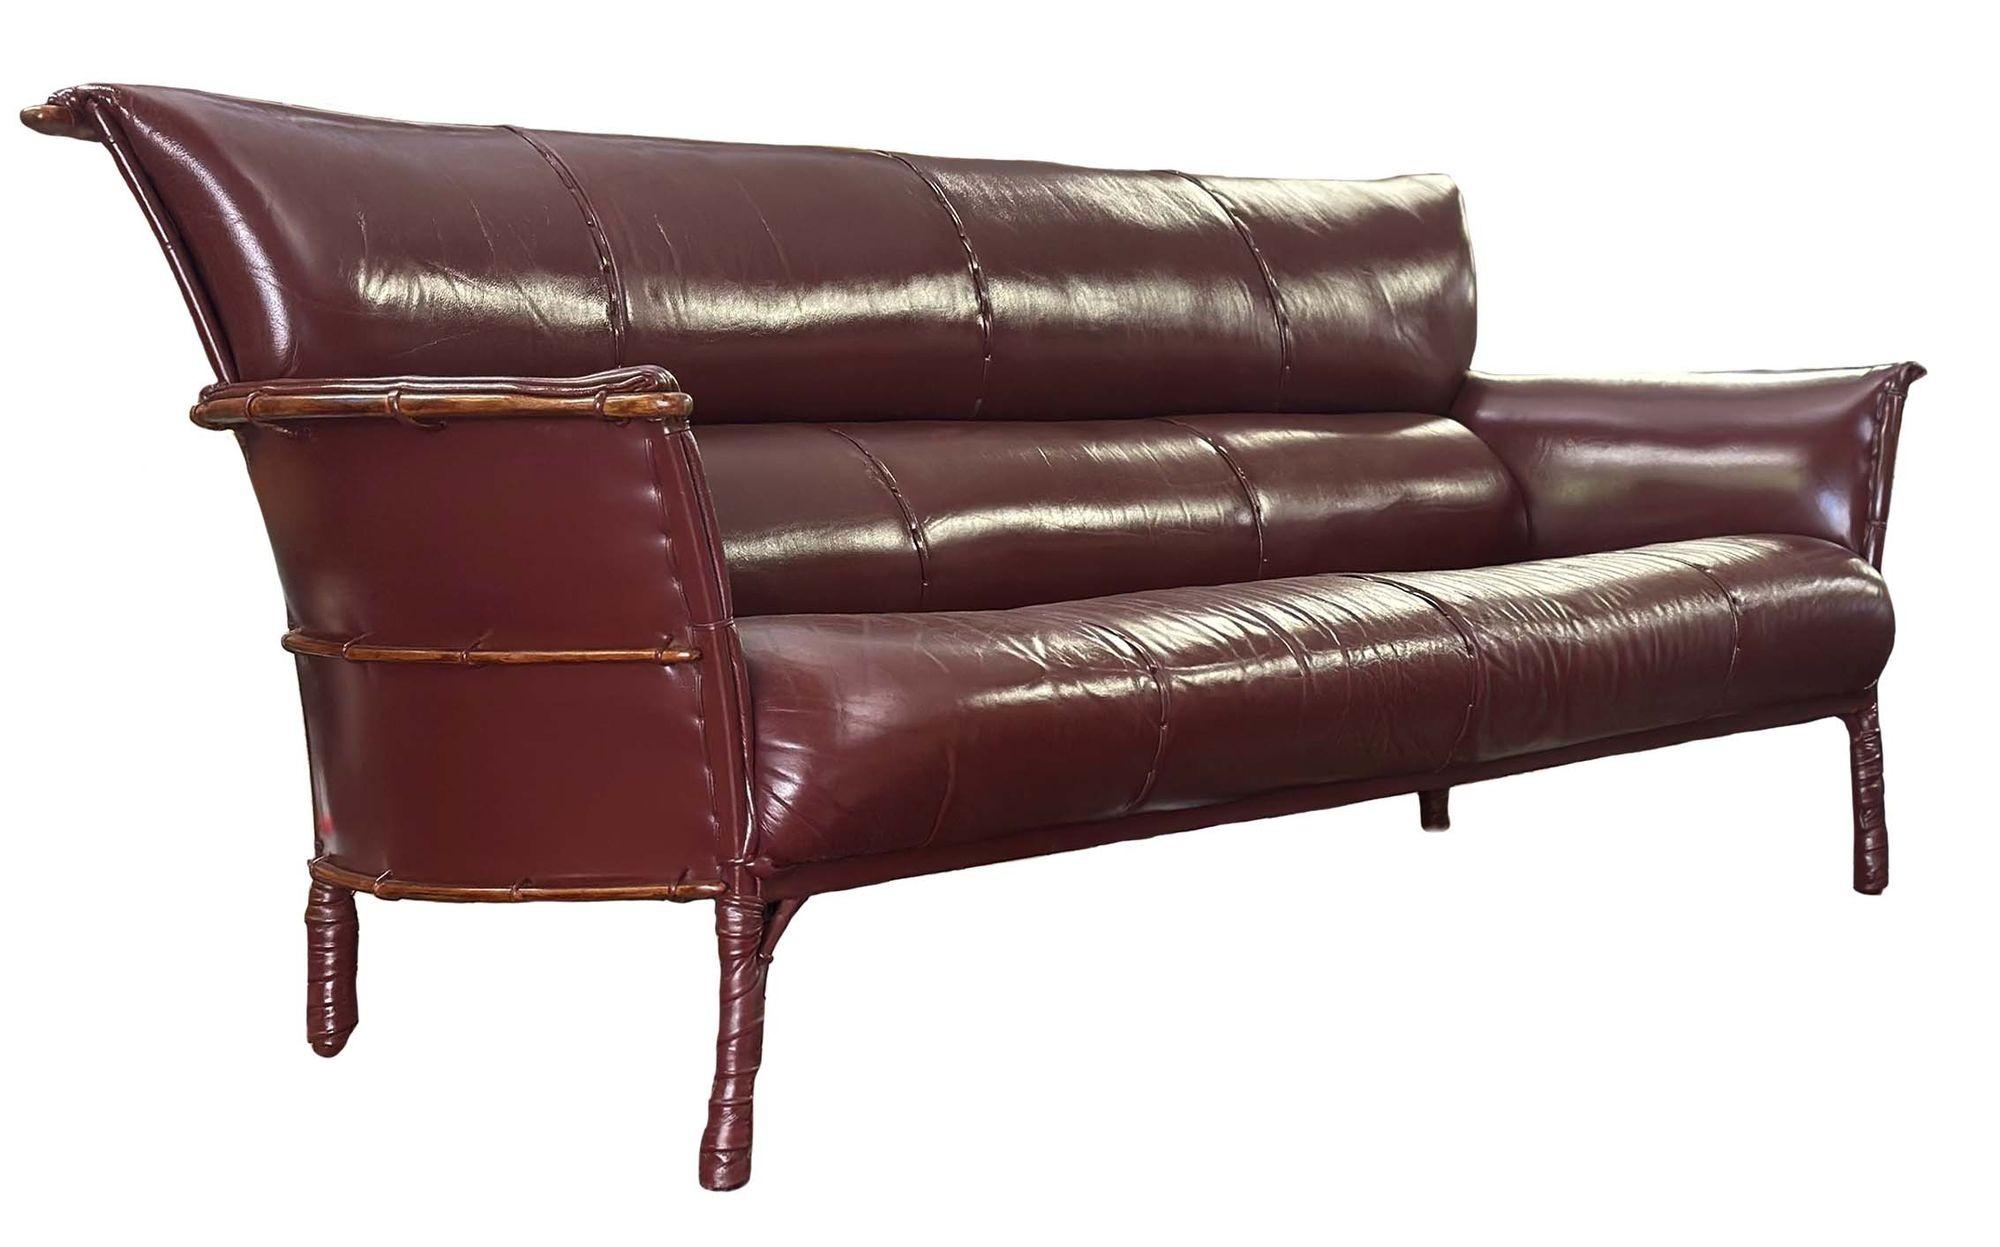 Versatile and stylish burgundy leather sofa by Pacific Green. The leather has been newly reconditioned and the back of the frame is wrapped around palm wood ribs.
From Pacific Green Website:
